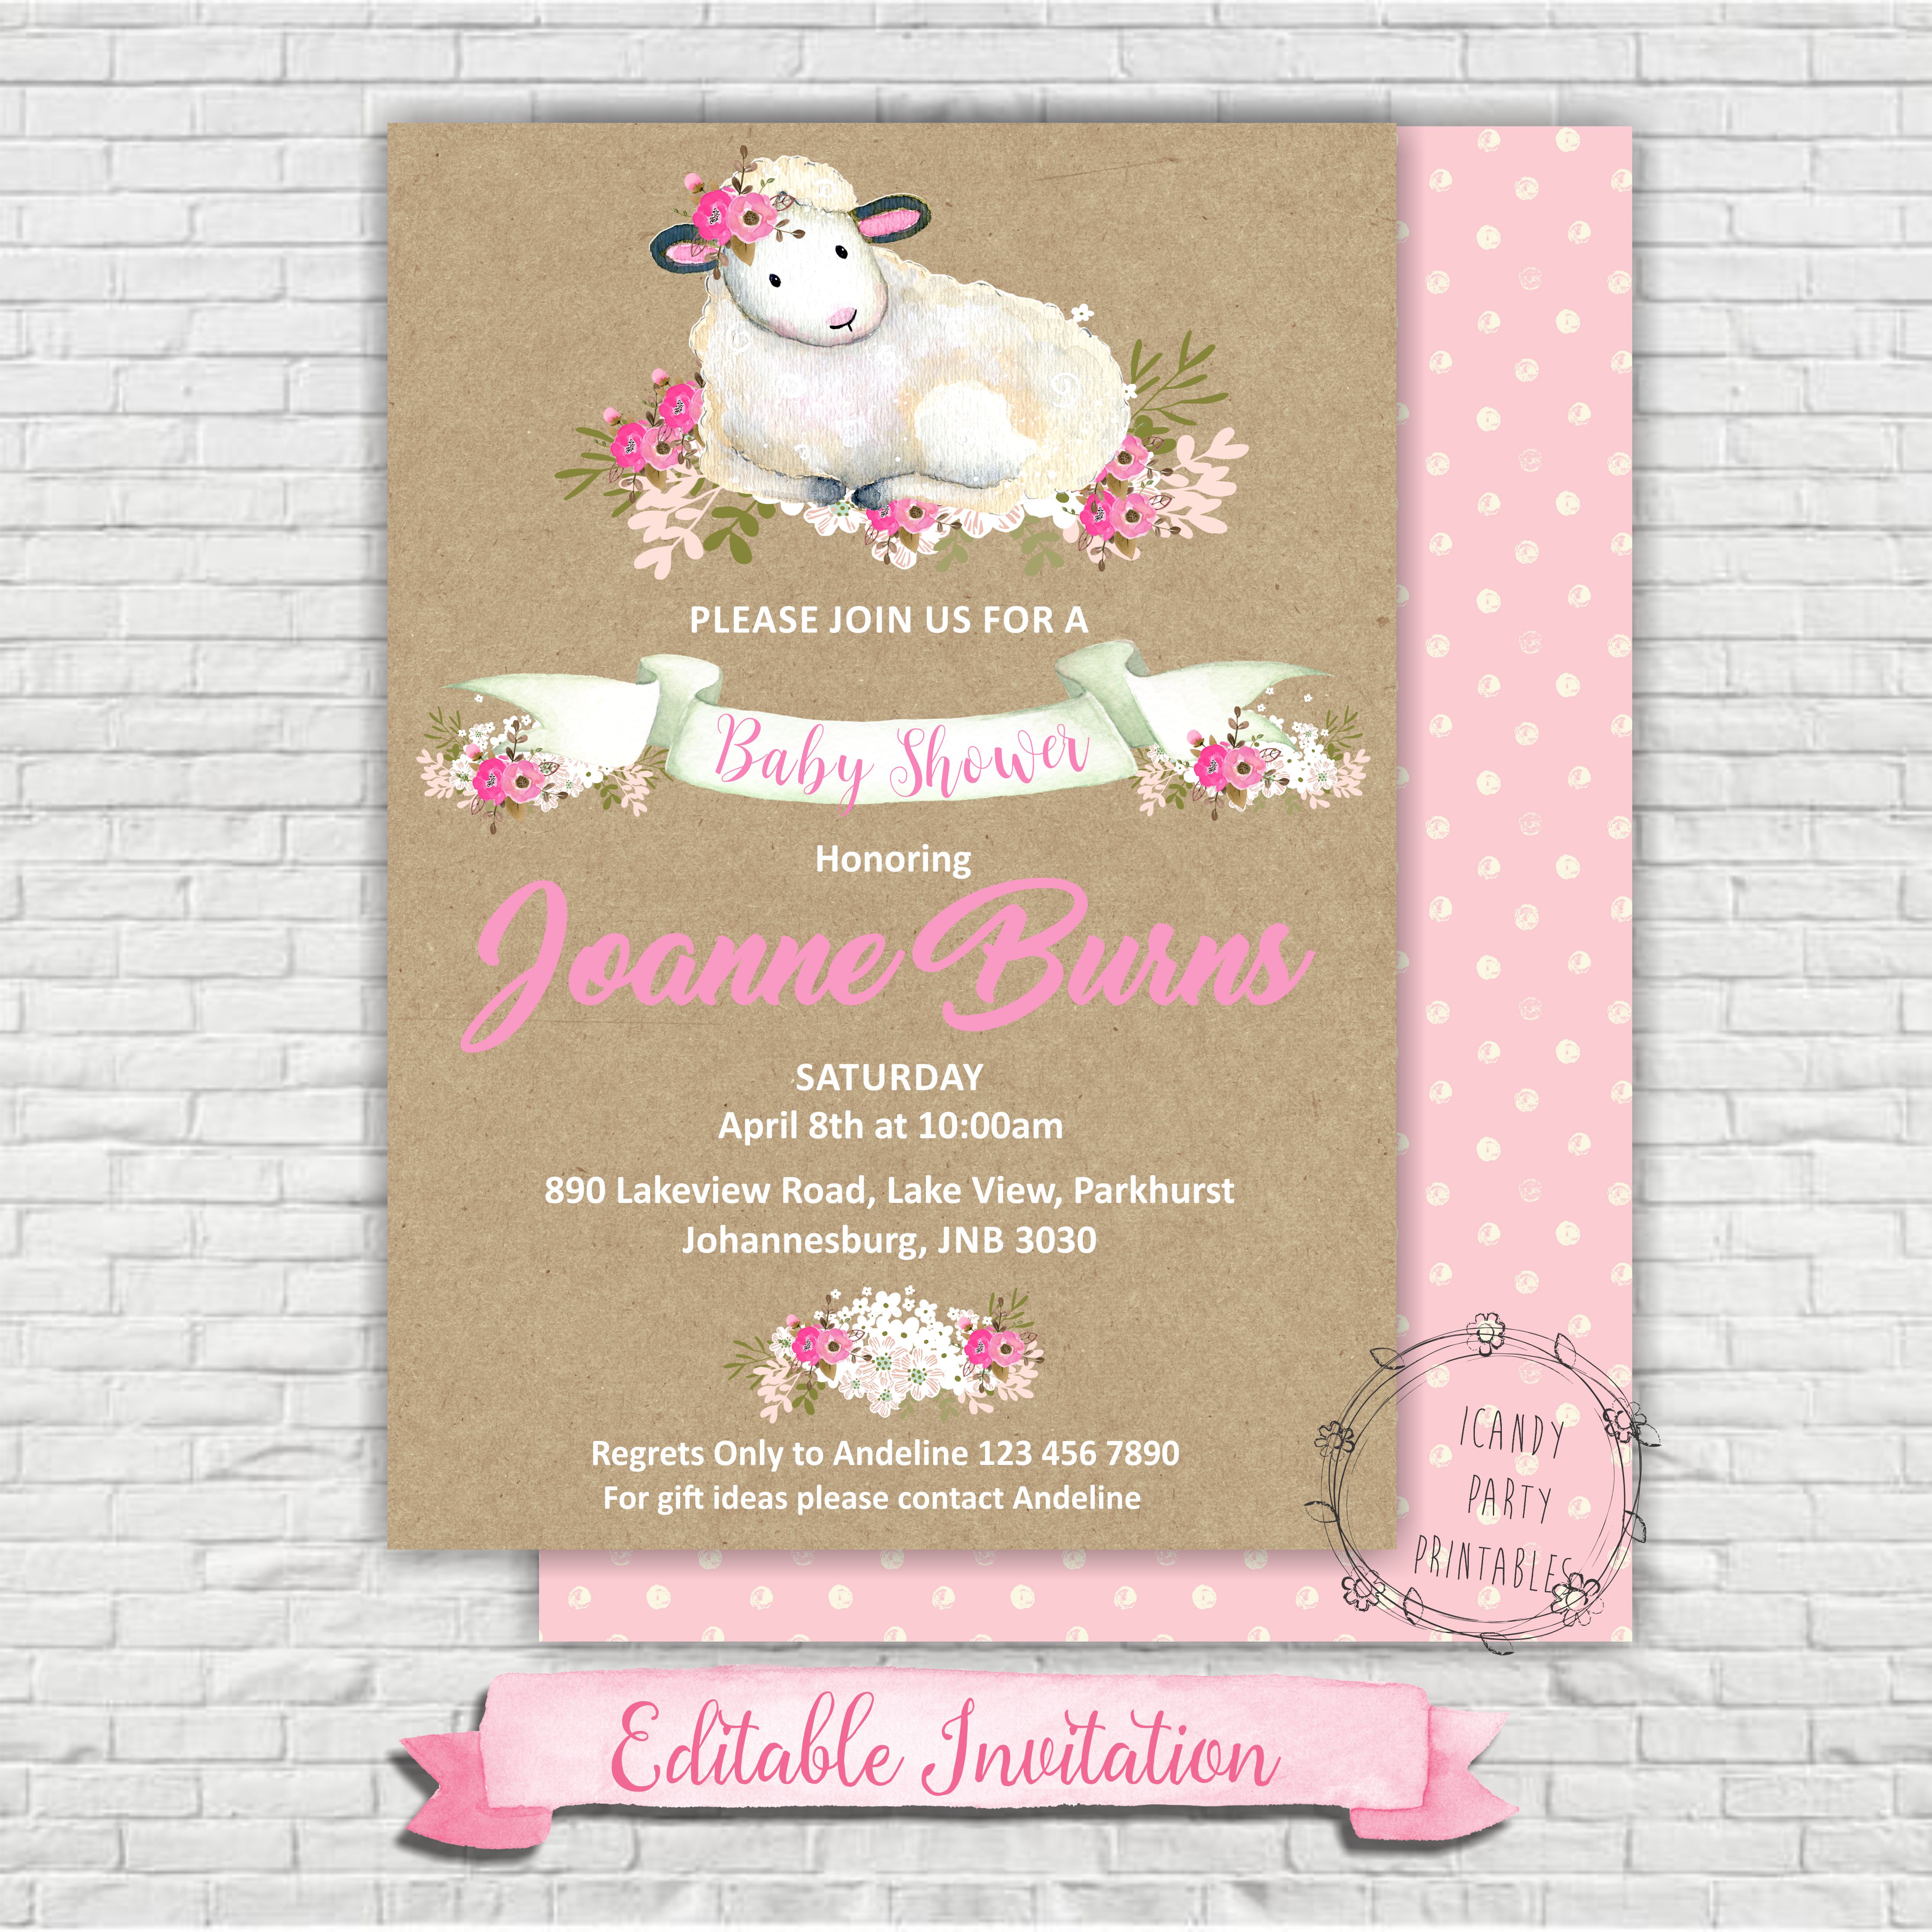 Full Size of Baby Shower:cheap Invitations Baby Shower Homemade Baby Shower Decorations Baby Shower Centerpiece Ideas For Boys Homemade Baby Shower Centerpieces Baby Shower Card Message Ideas Baby Girl Party Plates Baby Shower Invitations Baby Shower Favors